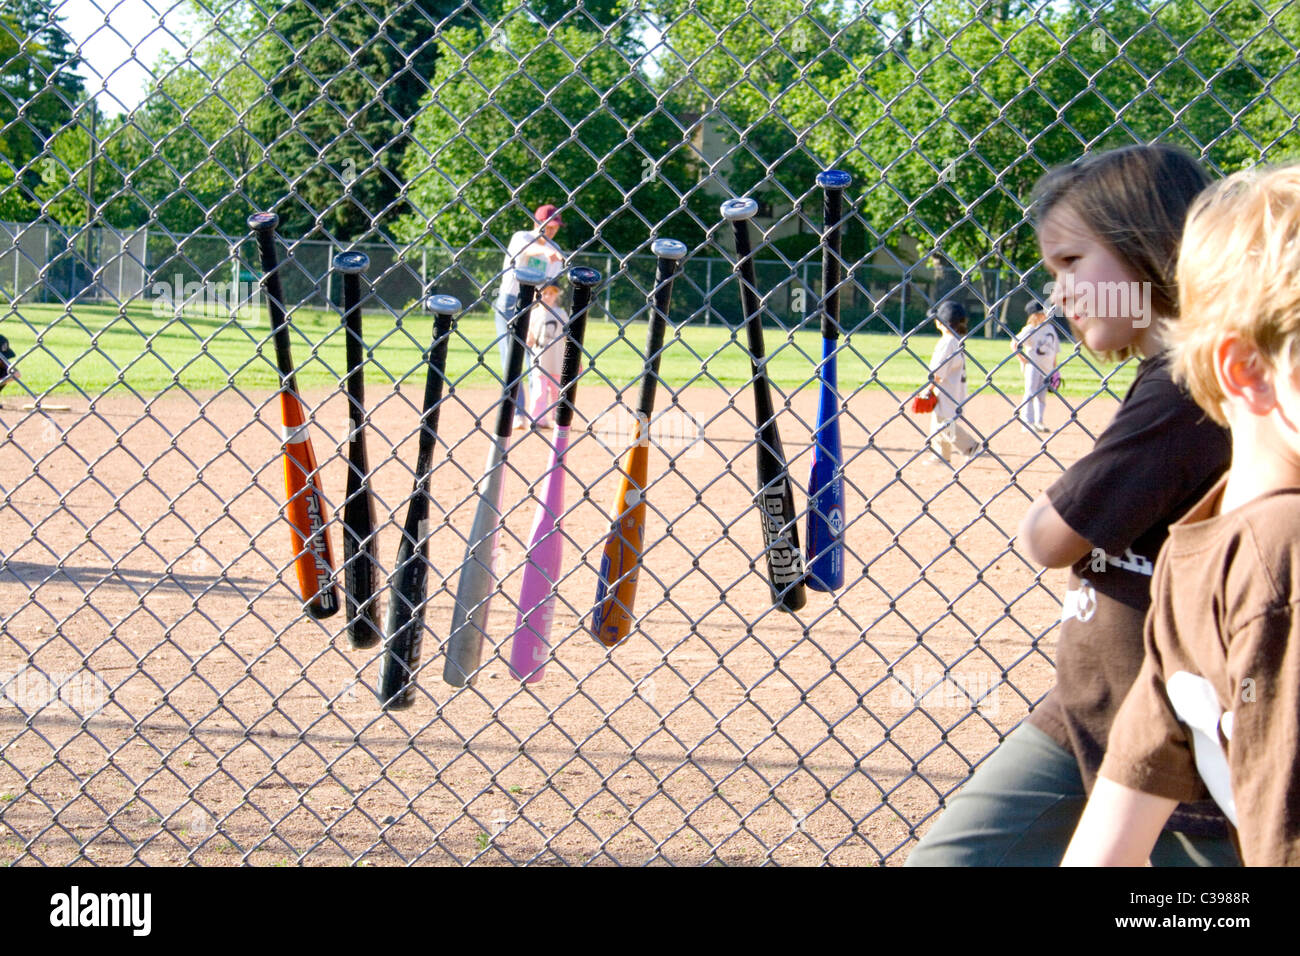 Baseball bats are lined up hanging on the fence. St Paul Minnesota MN USA Stock Photo